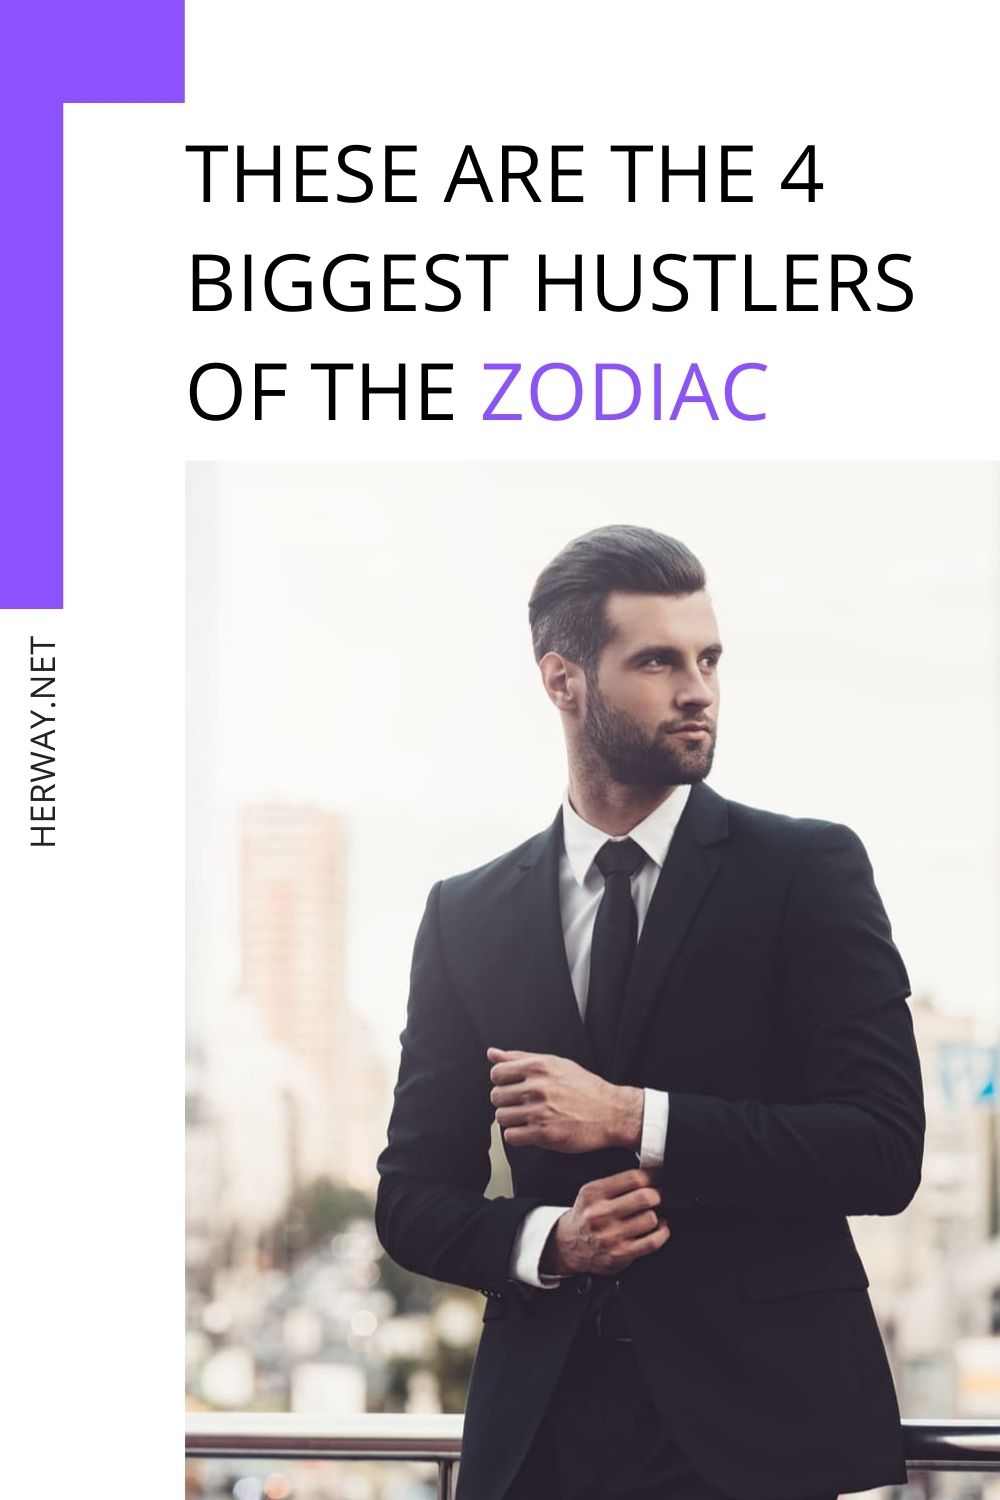 These Are The 4 BIGGEST Hustlers Of The Zodiac